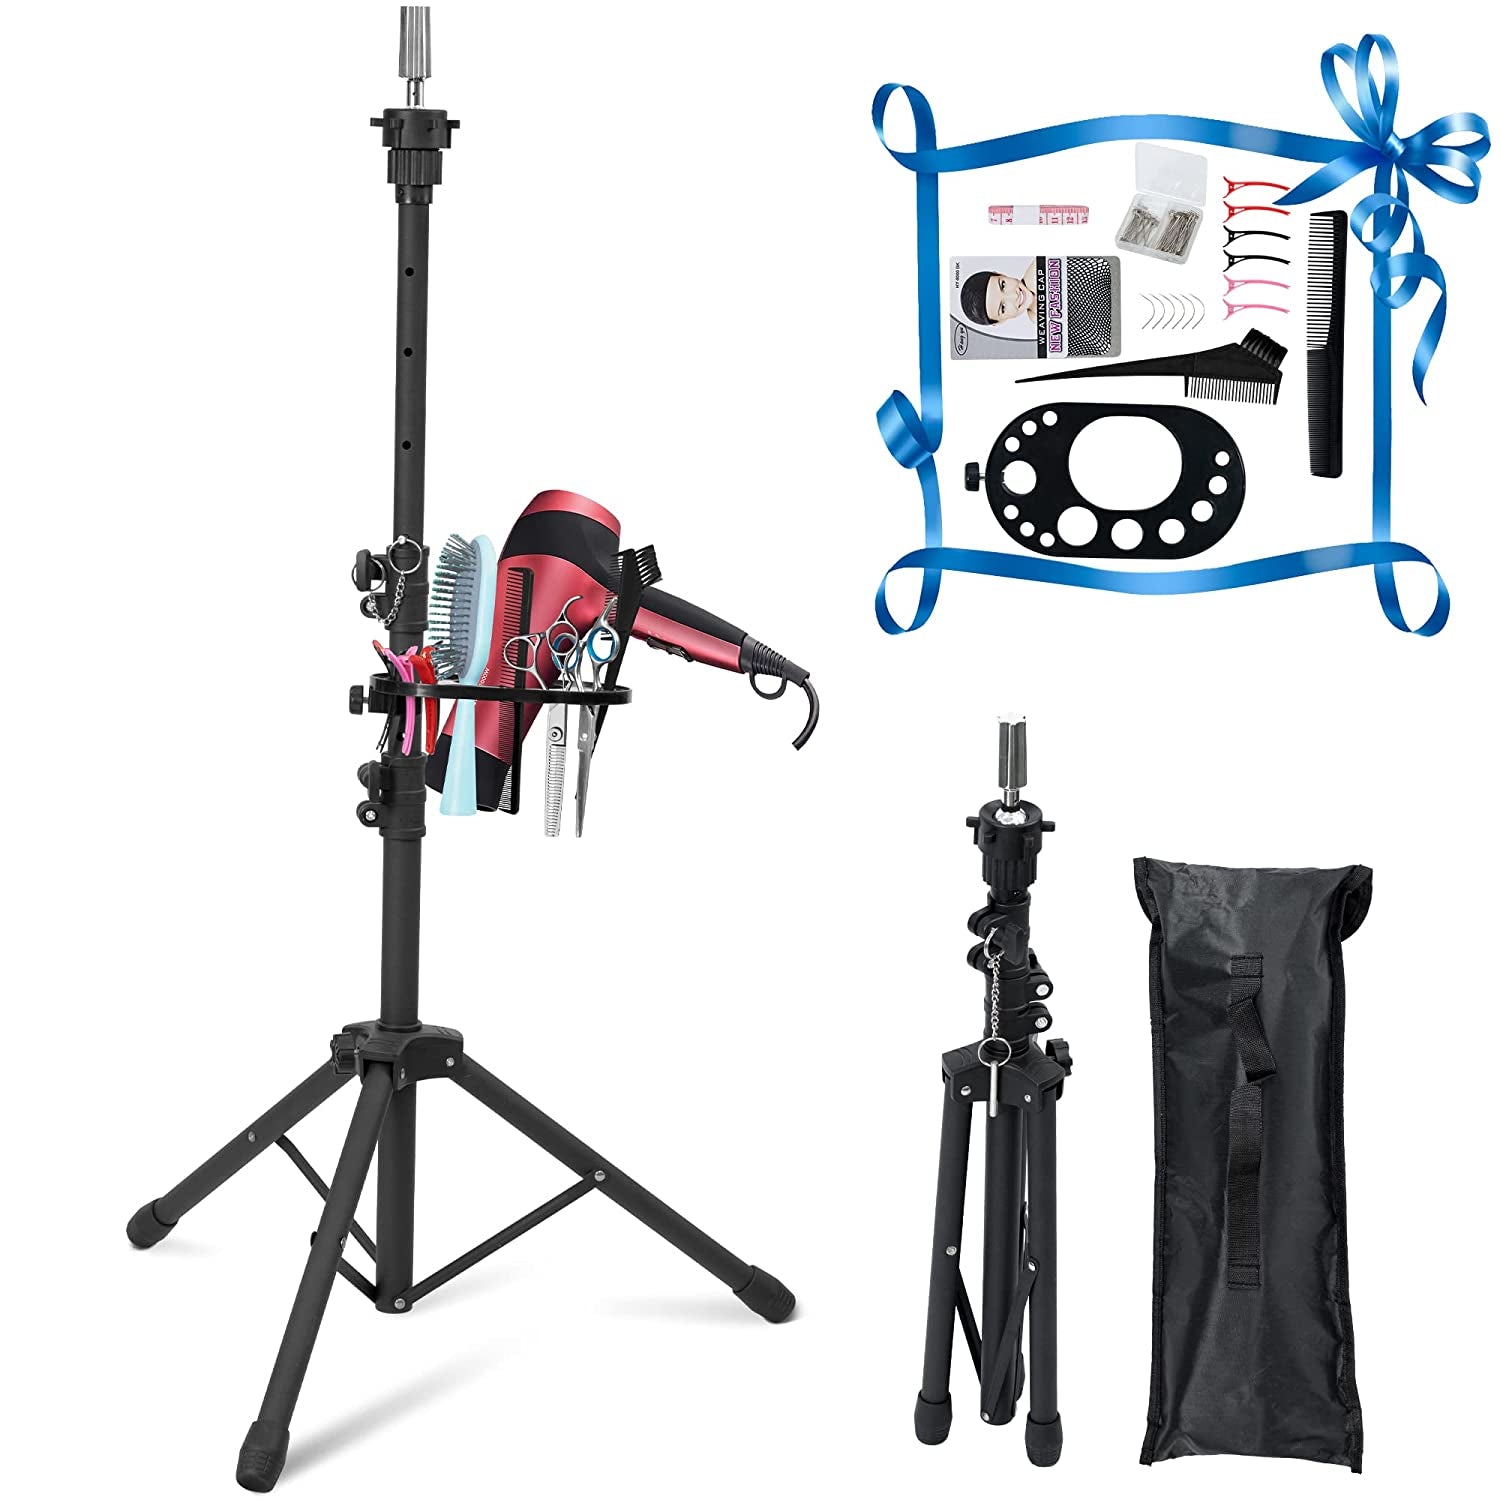 Wig Stand Tripod Upgraded, Double Locking Adjustable Mannequin Head Stand, Reinforced Metal Wig Head Stand with Tool Tray for Cosmetology Hairdressing Training, Black (53.5 Inches)